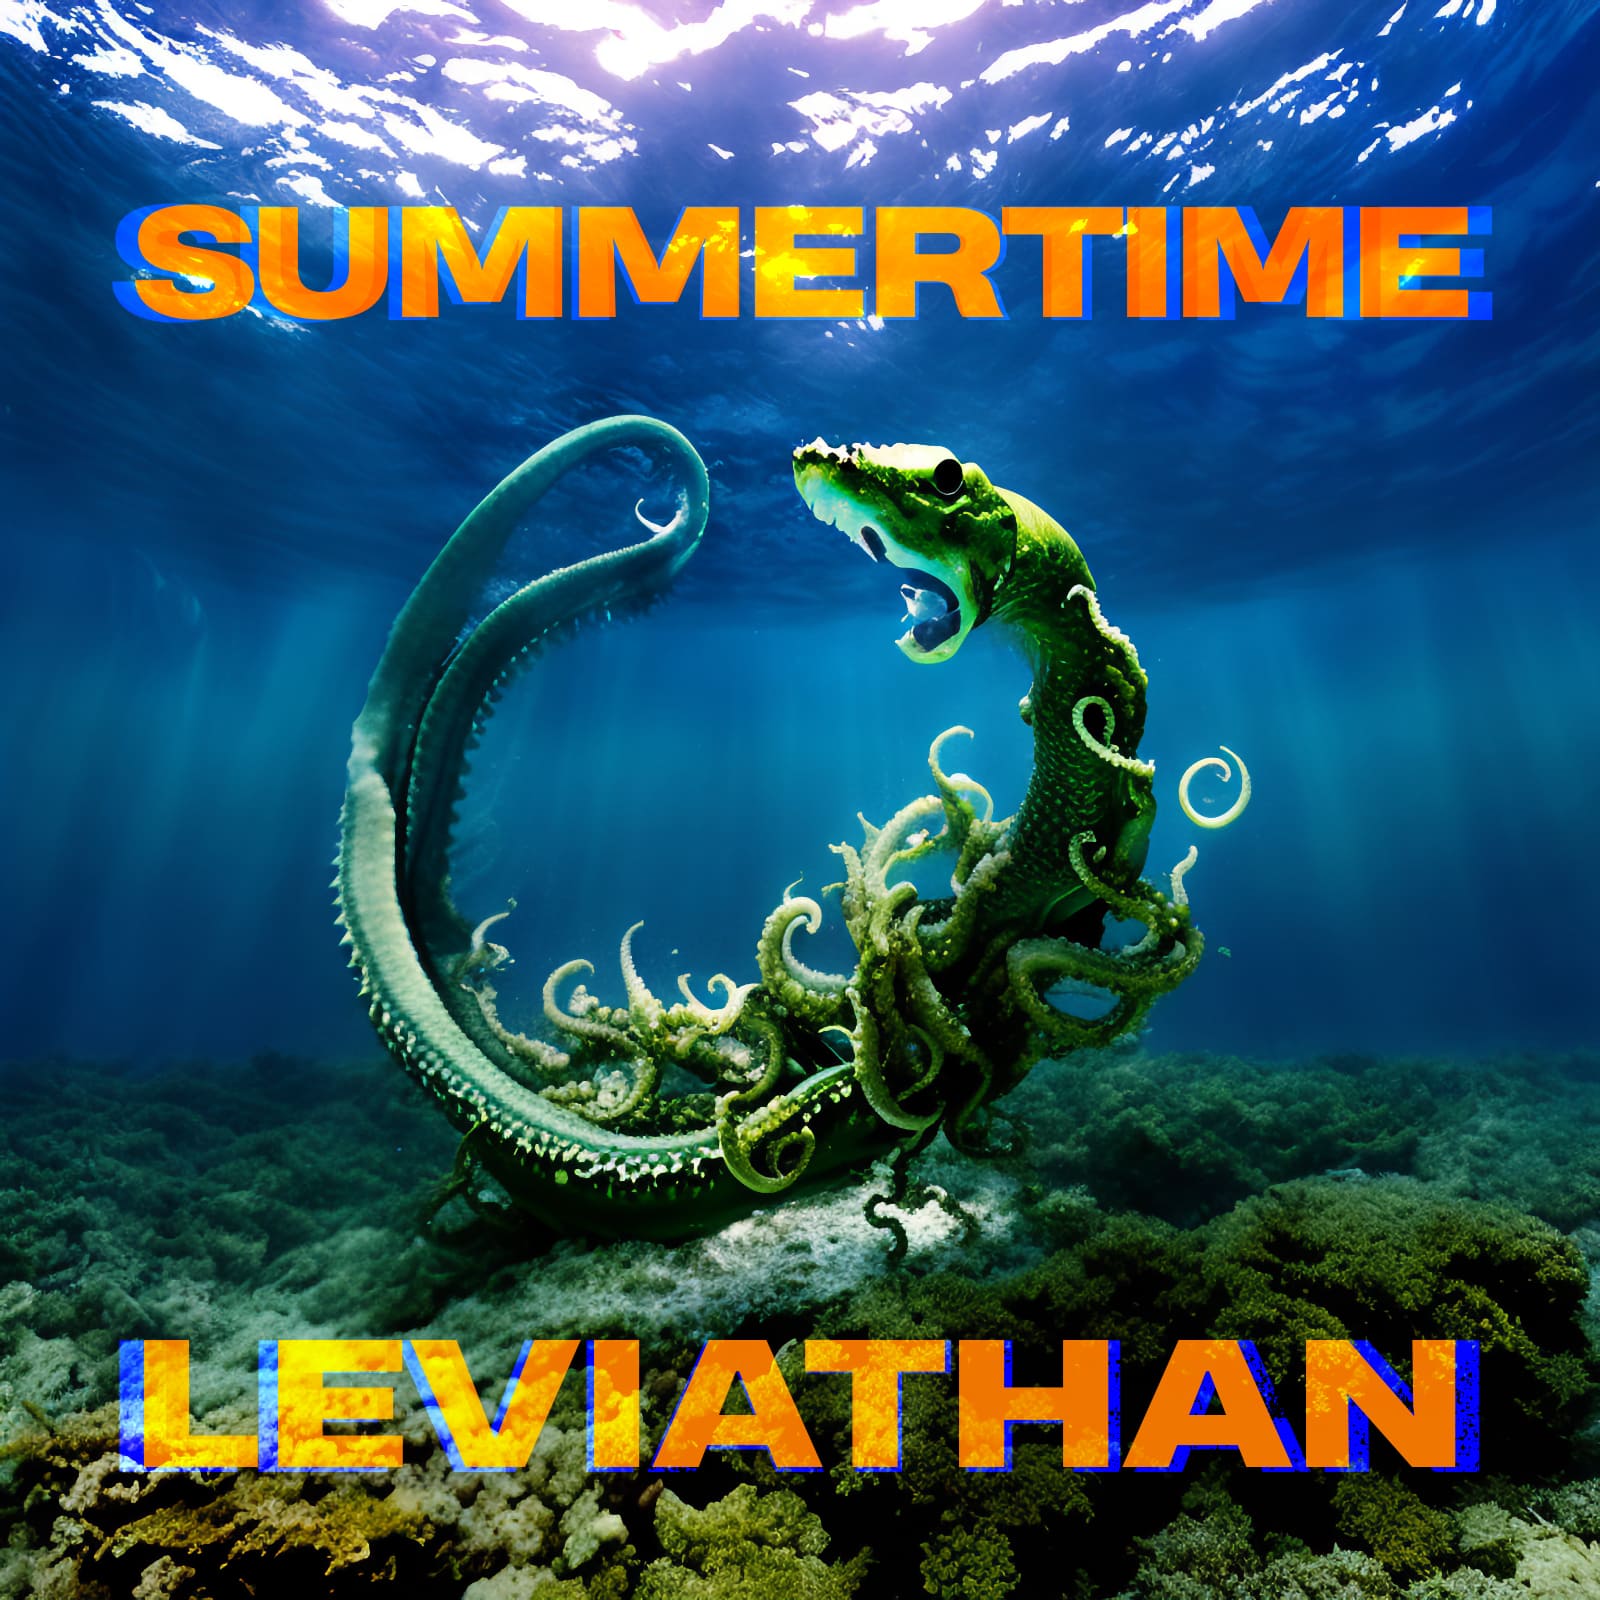 tbc aka Instamatic - Summertime Leviathan (Ella Fitzgerald & Louis Armstrong vs Everything Everything) mashup cover